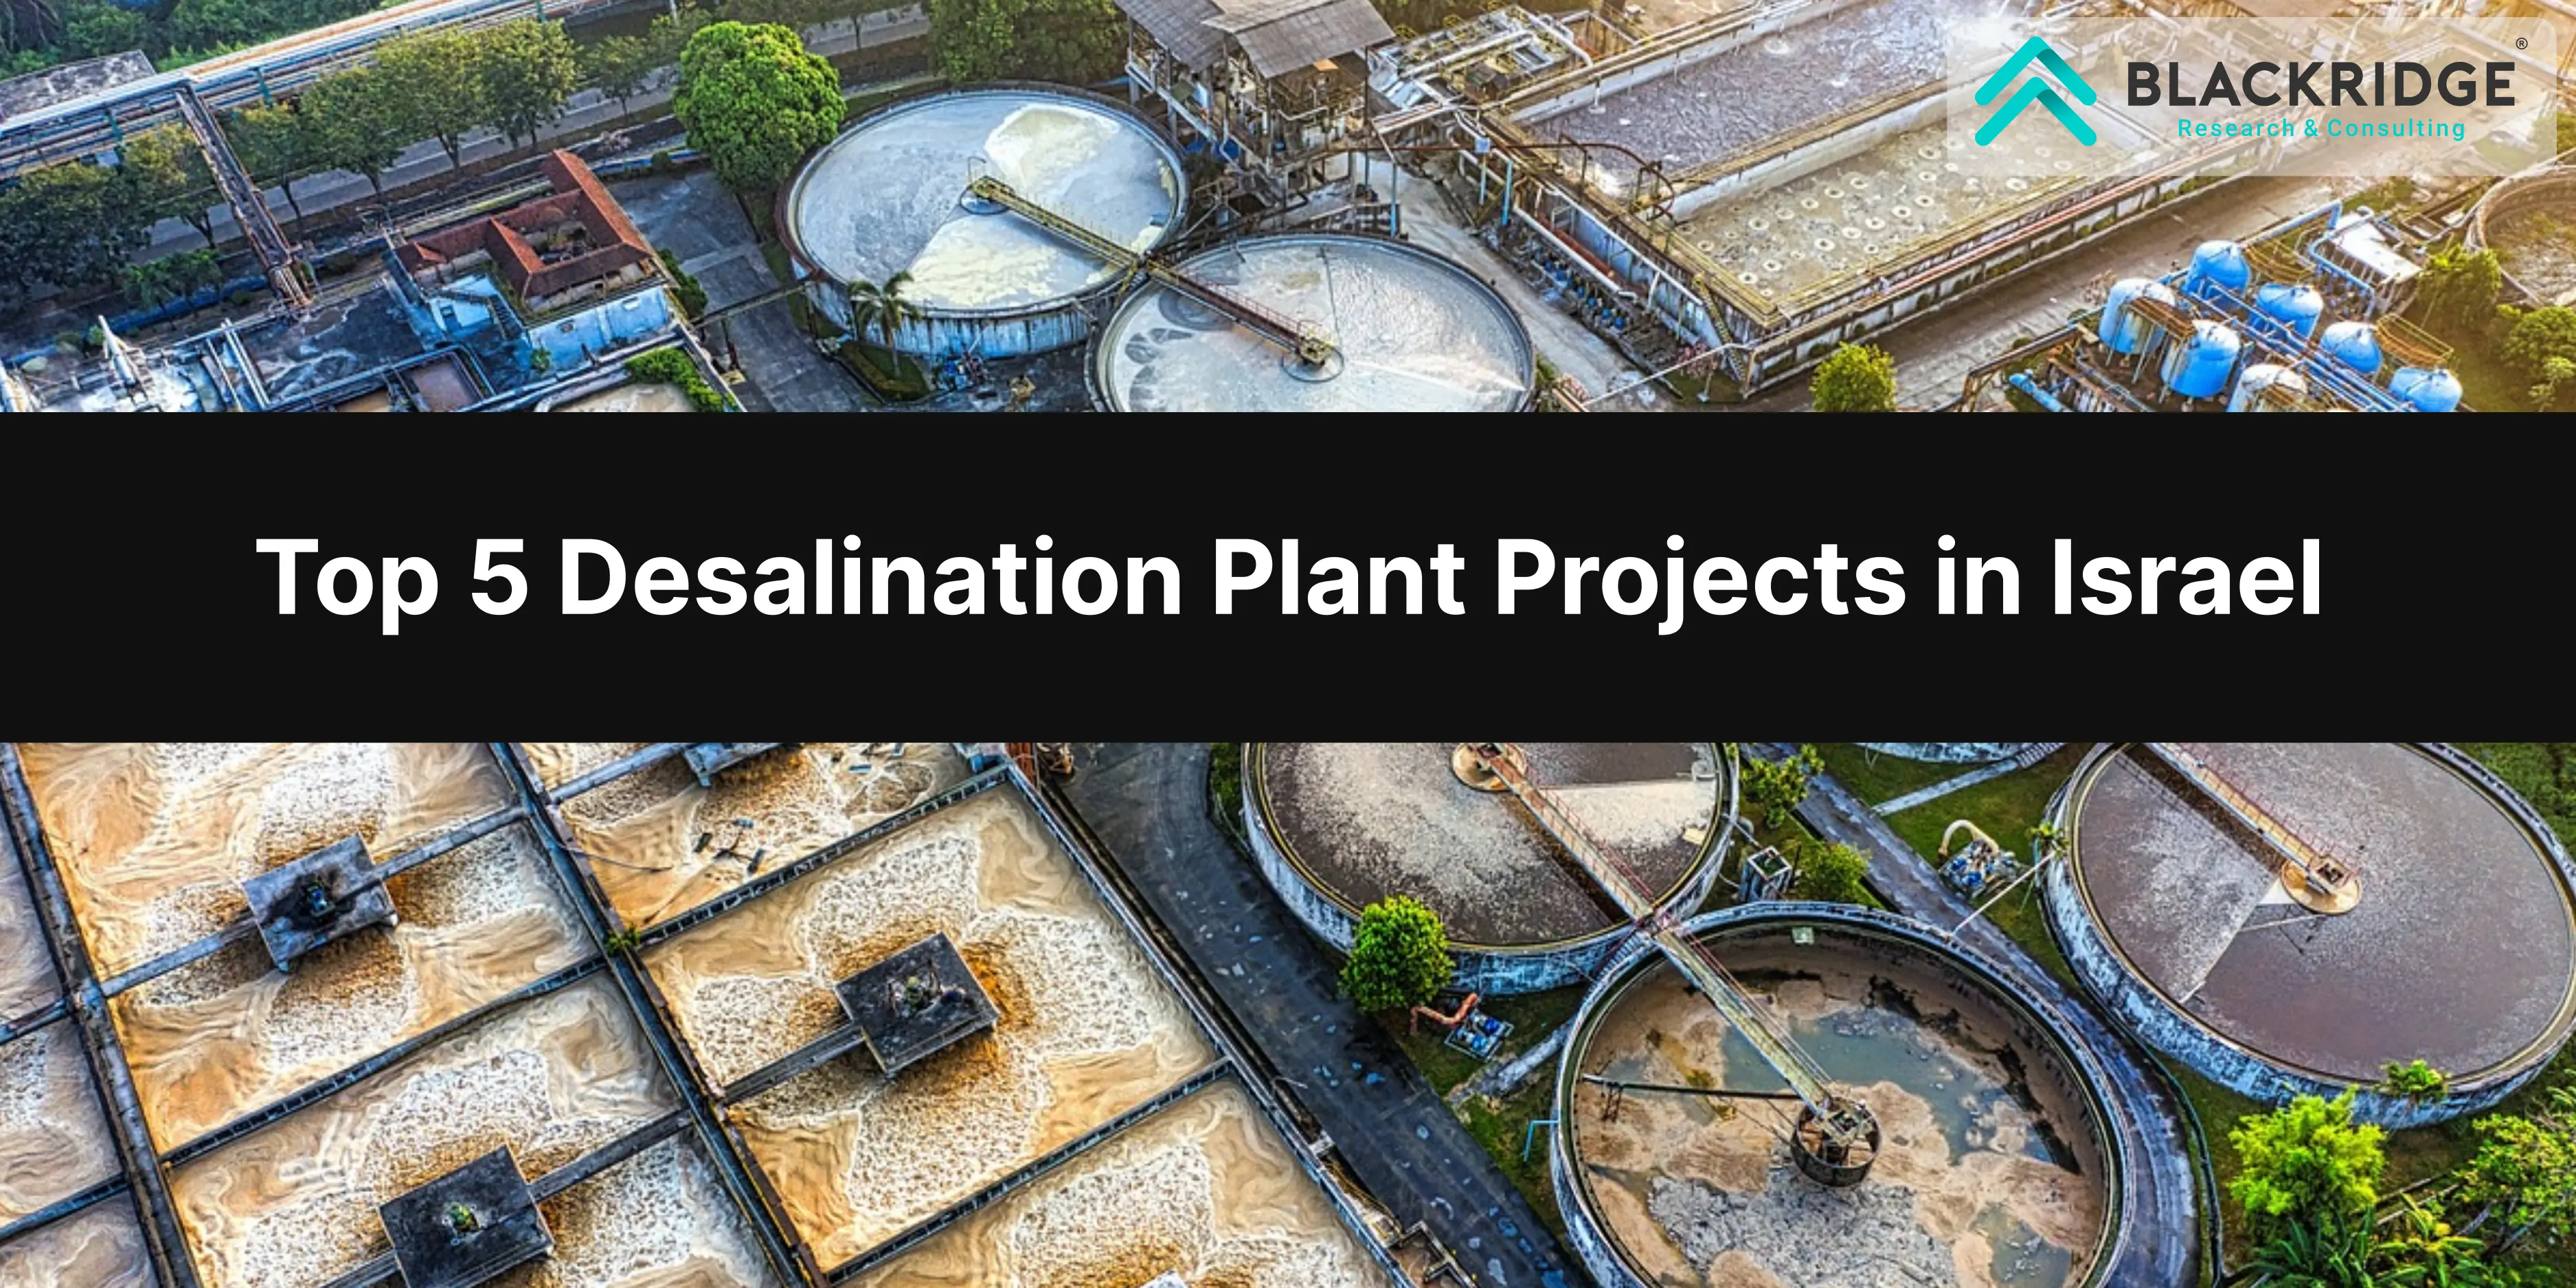 Top 5 Desalination Plant Projects in Israel